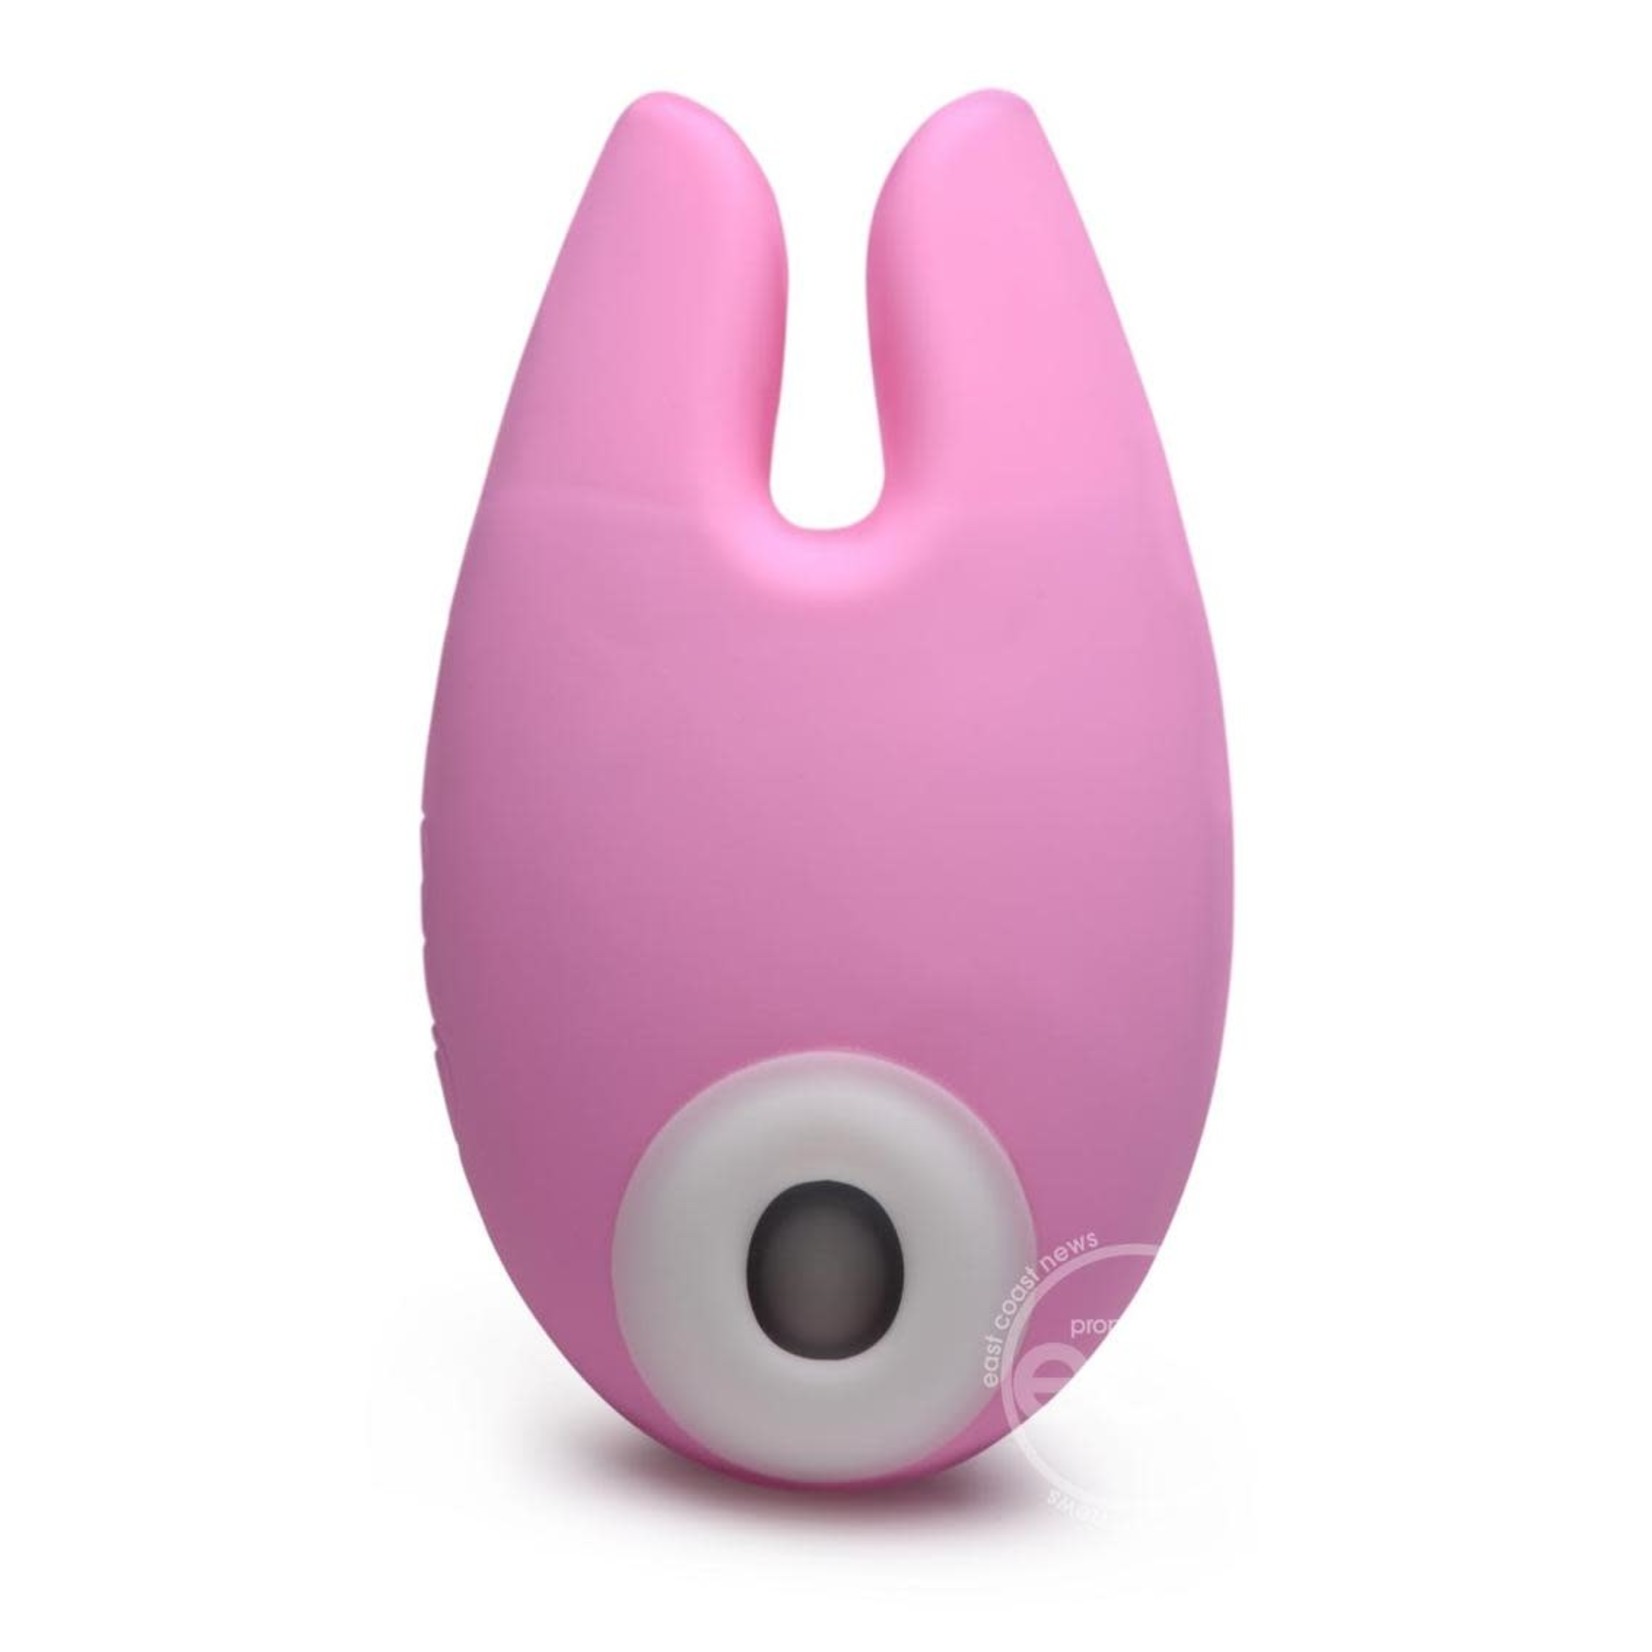 Inmi Shegasm Sucky Bunny 20X Rechargeable Silicone Clitoral Stimulator - Pink